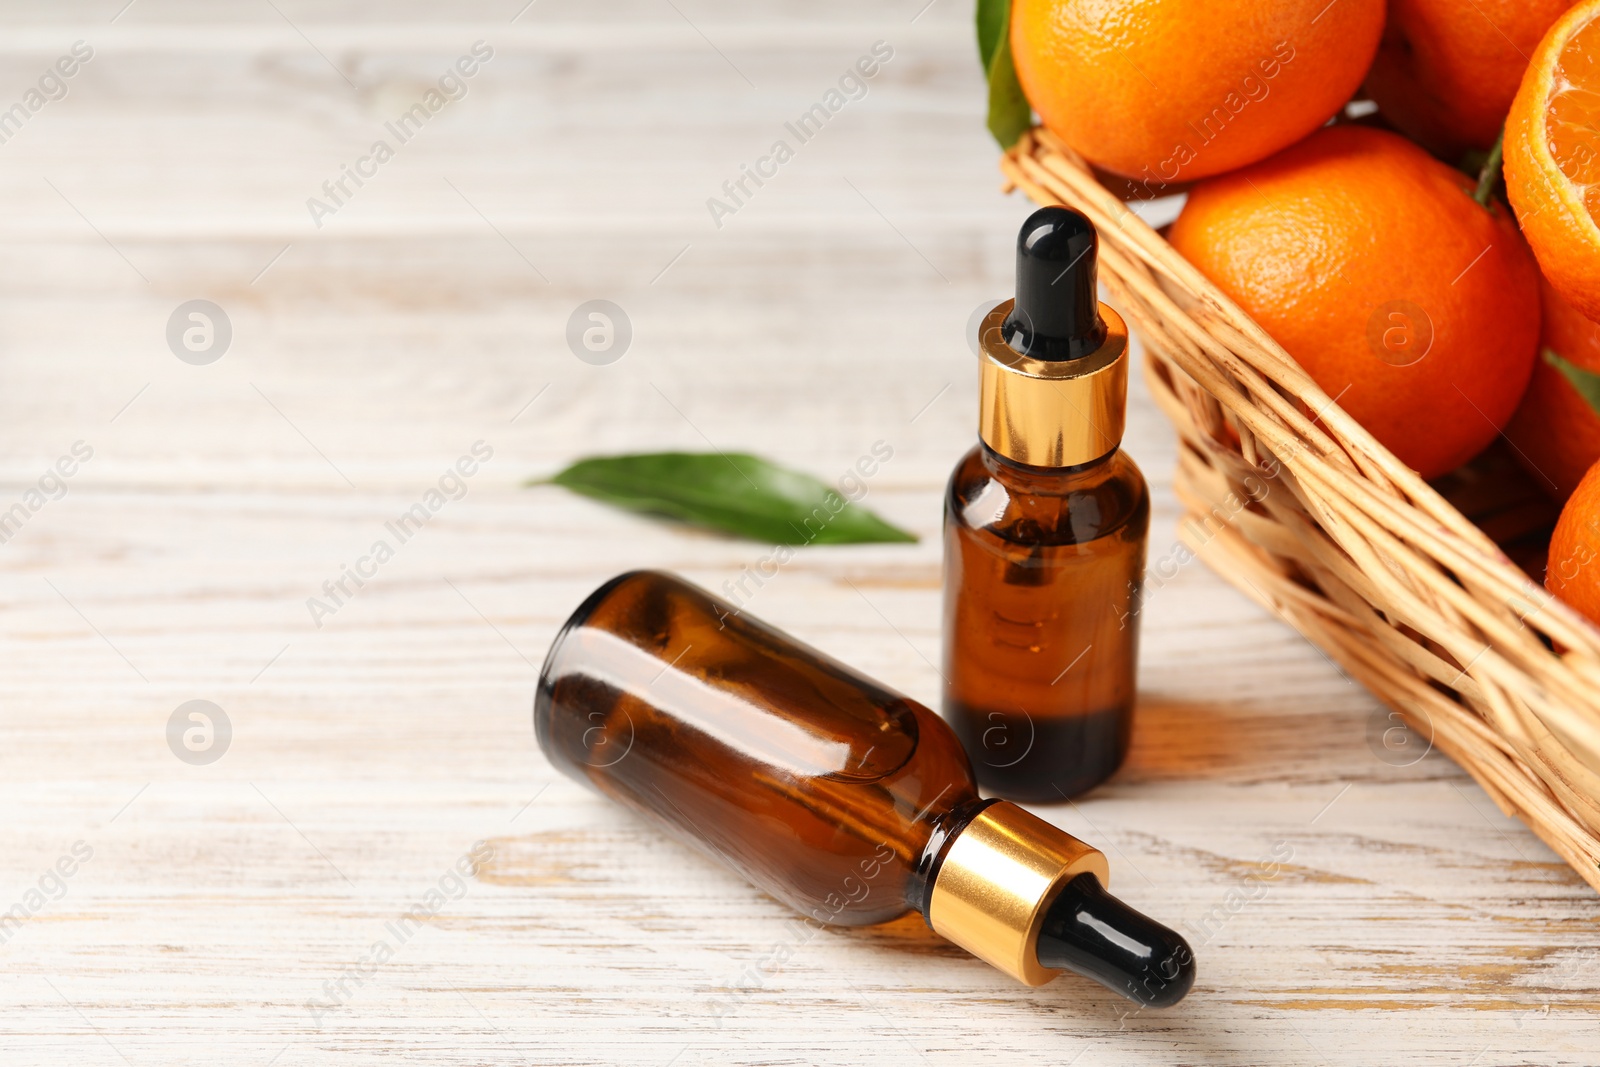 Photo of Bottle of tangerine essential oil and fresh fruits on white wooden table